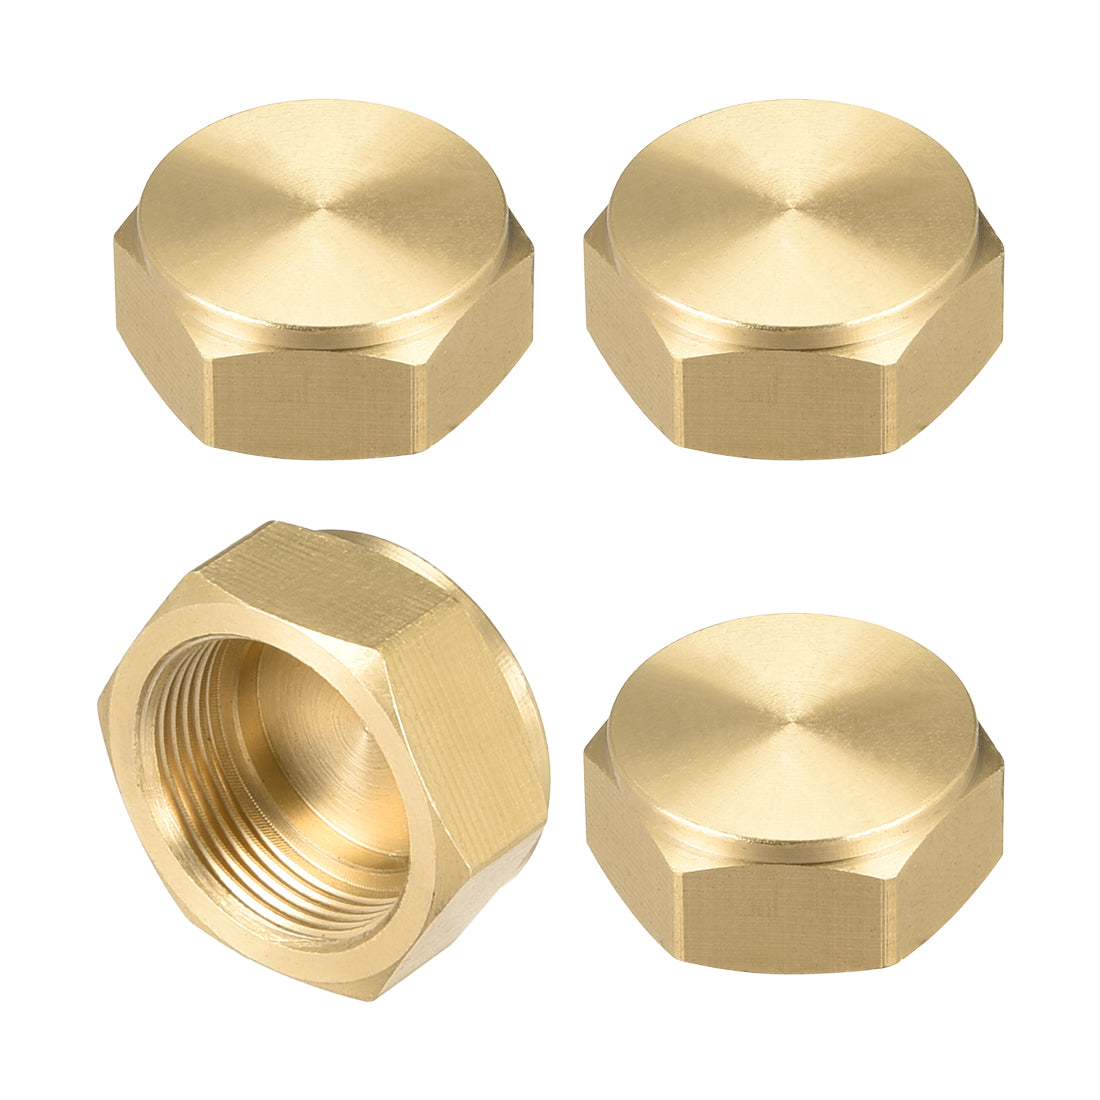 Uxcell Uxcell Brass Female Pipe Fitting Valve Cap M20x1.0 Hex Head End Plug Connector 4pcs